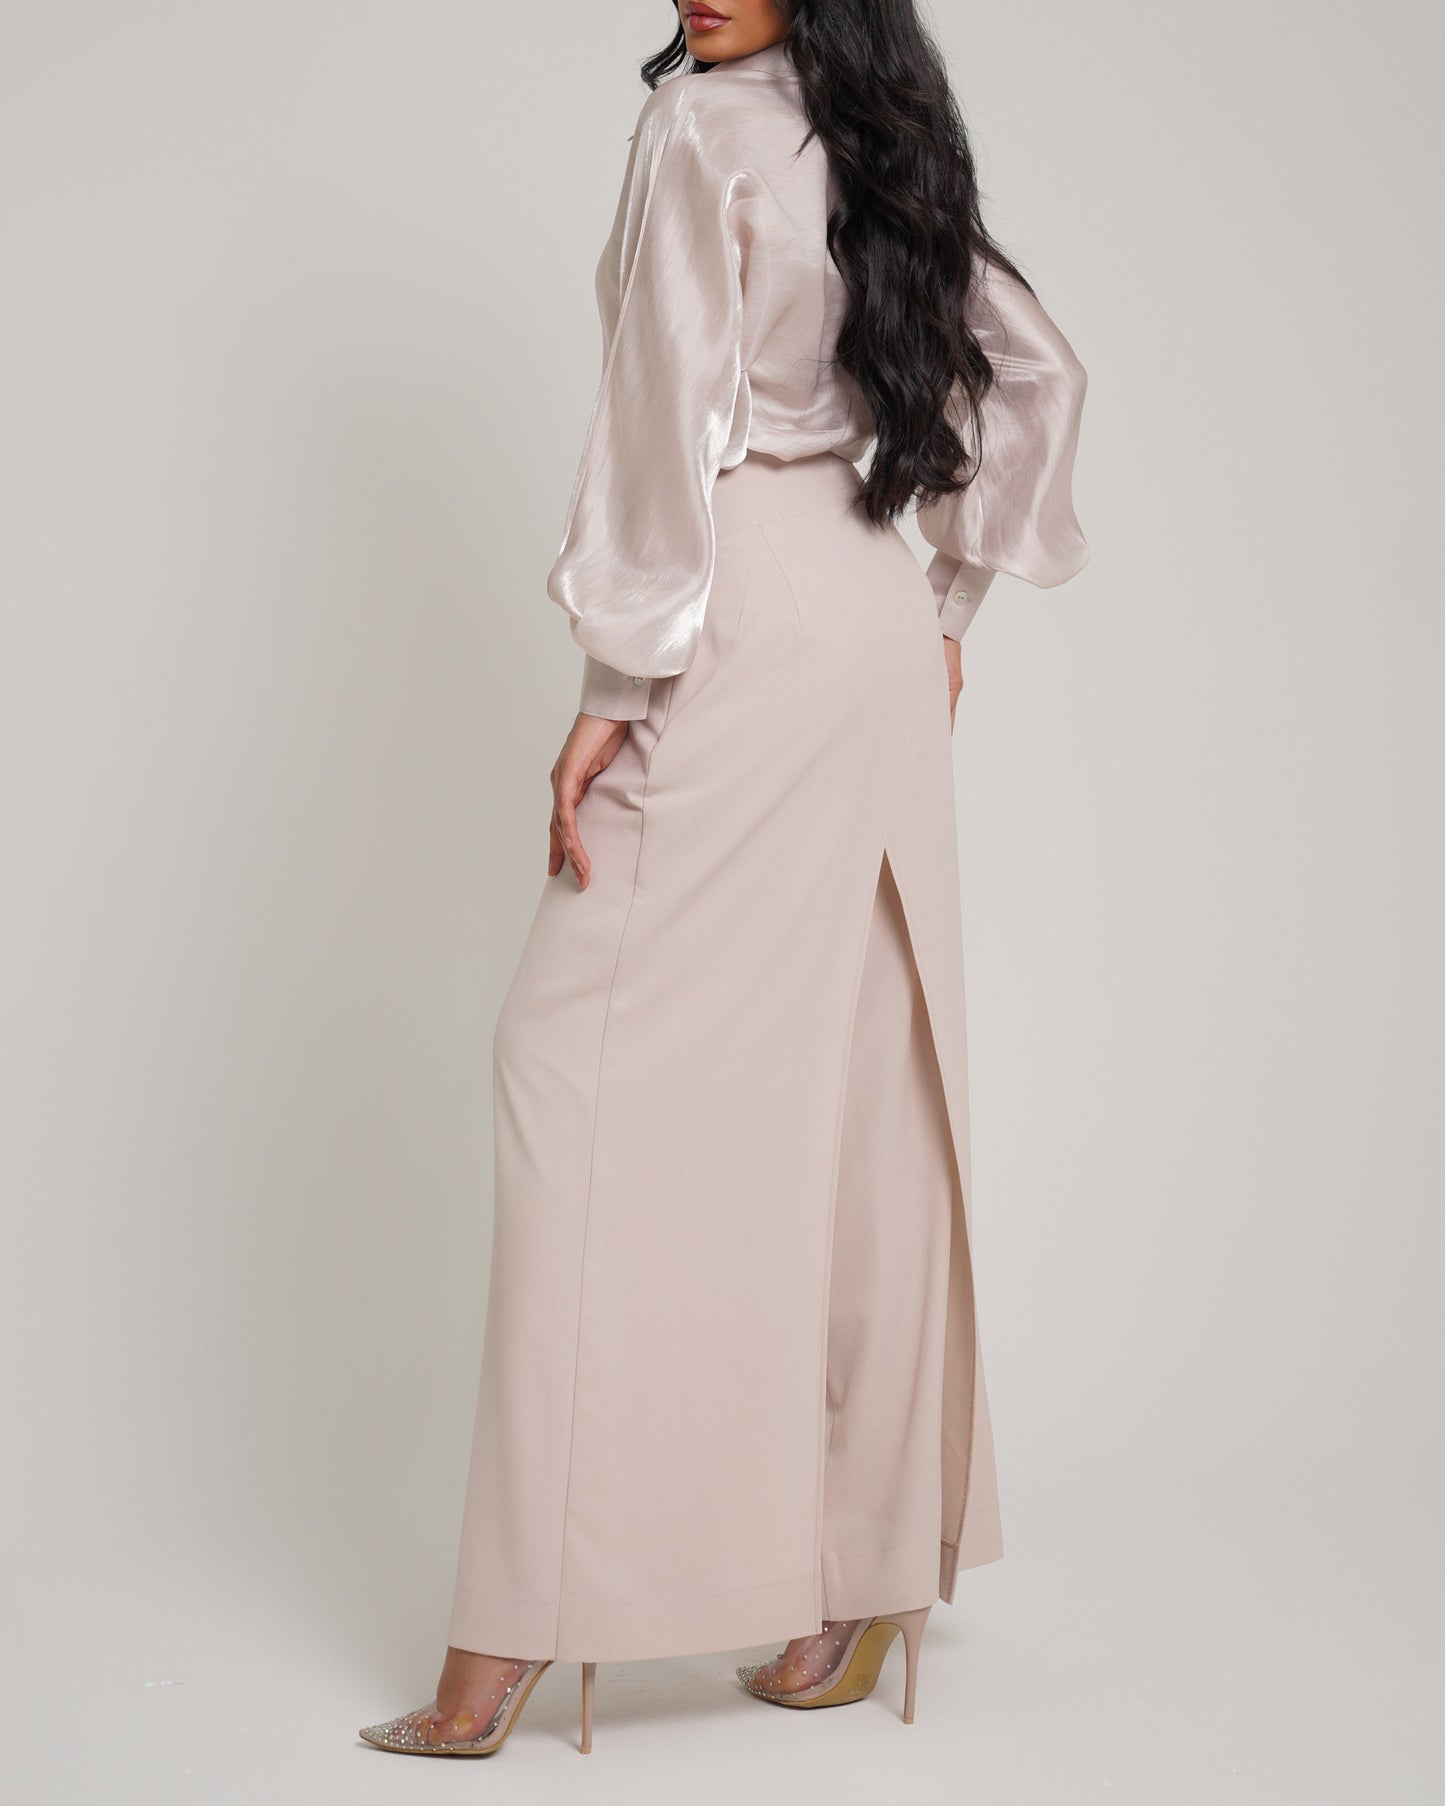 Overlapped corset waist trousers paired with organza shirt